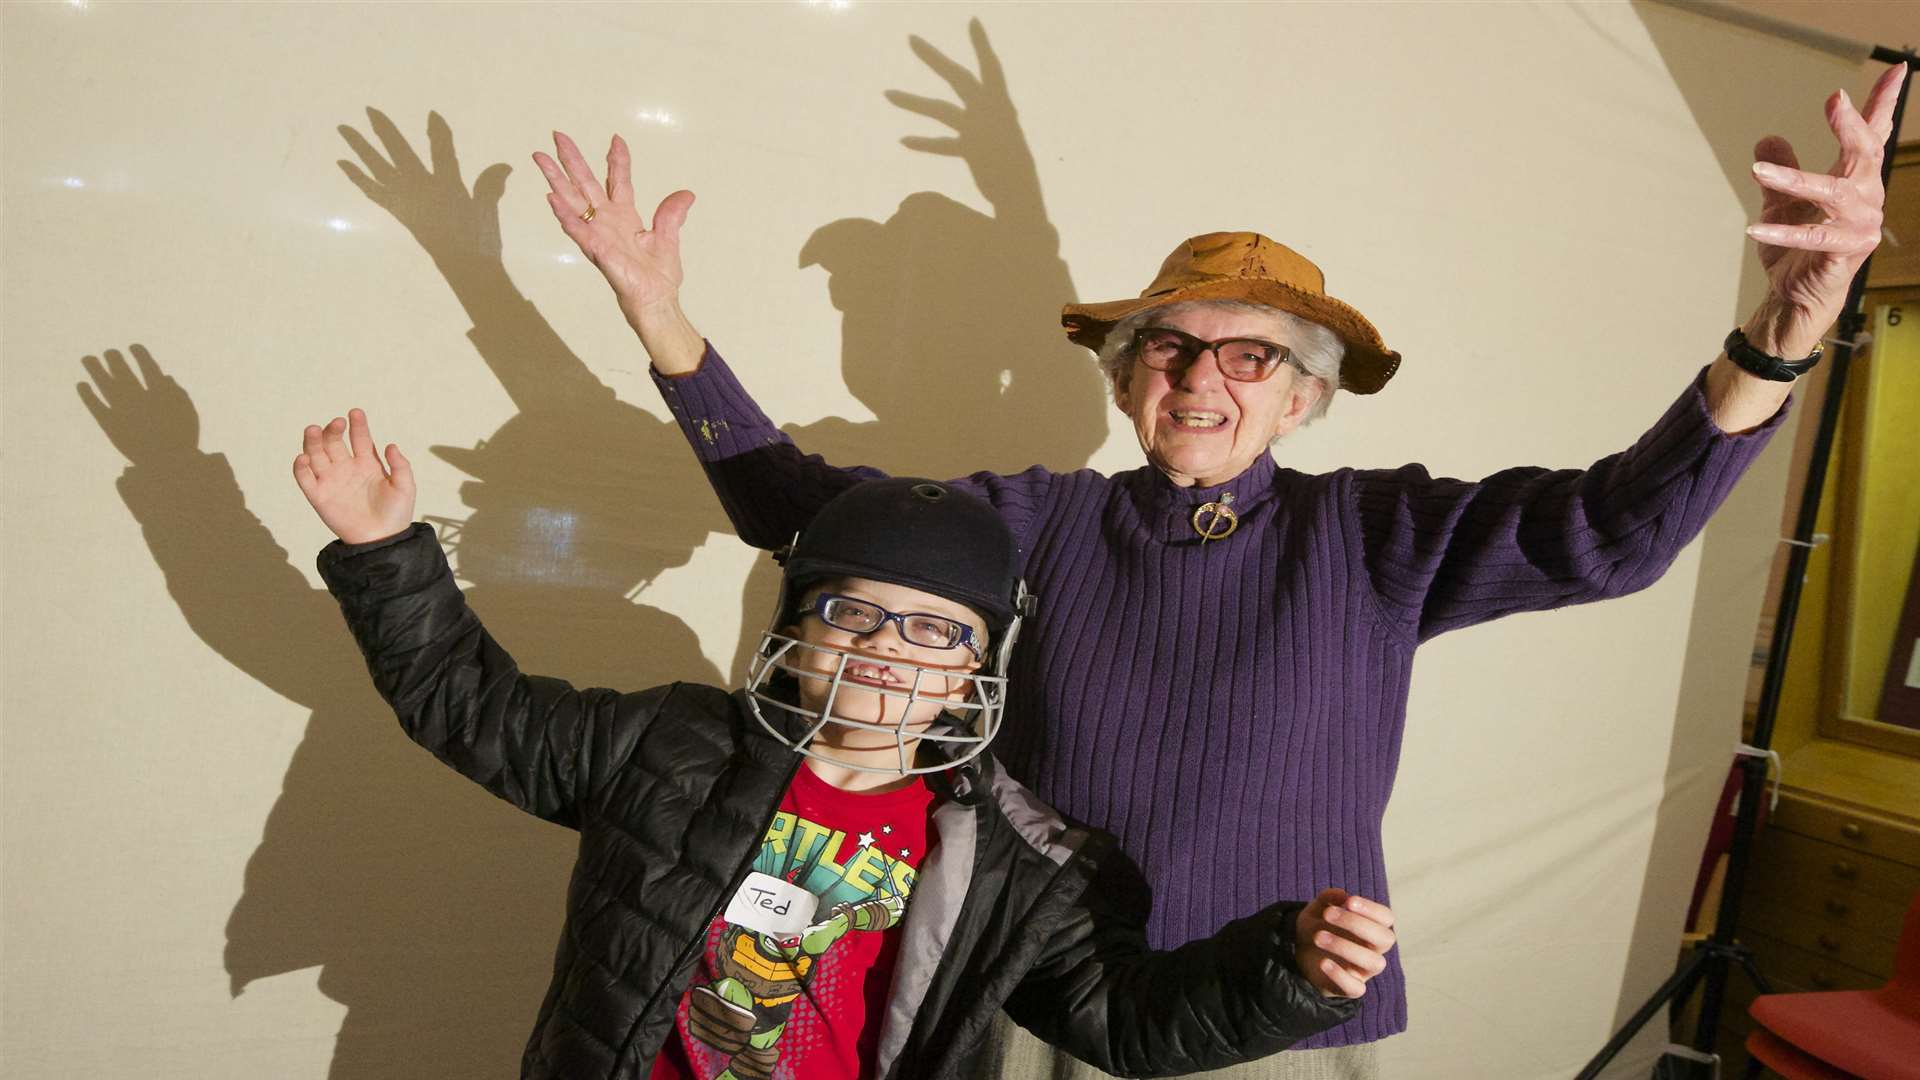 Ted, 7, with Barbara, 91, making shadow shapes.